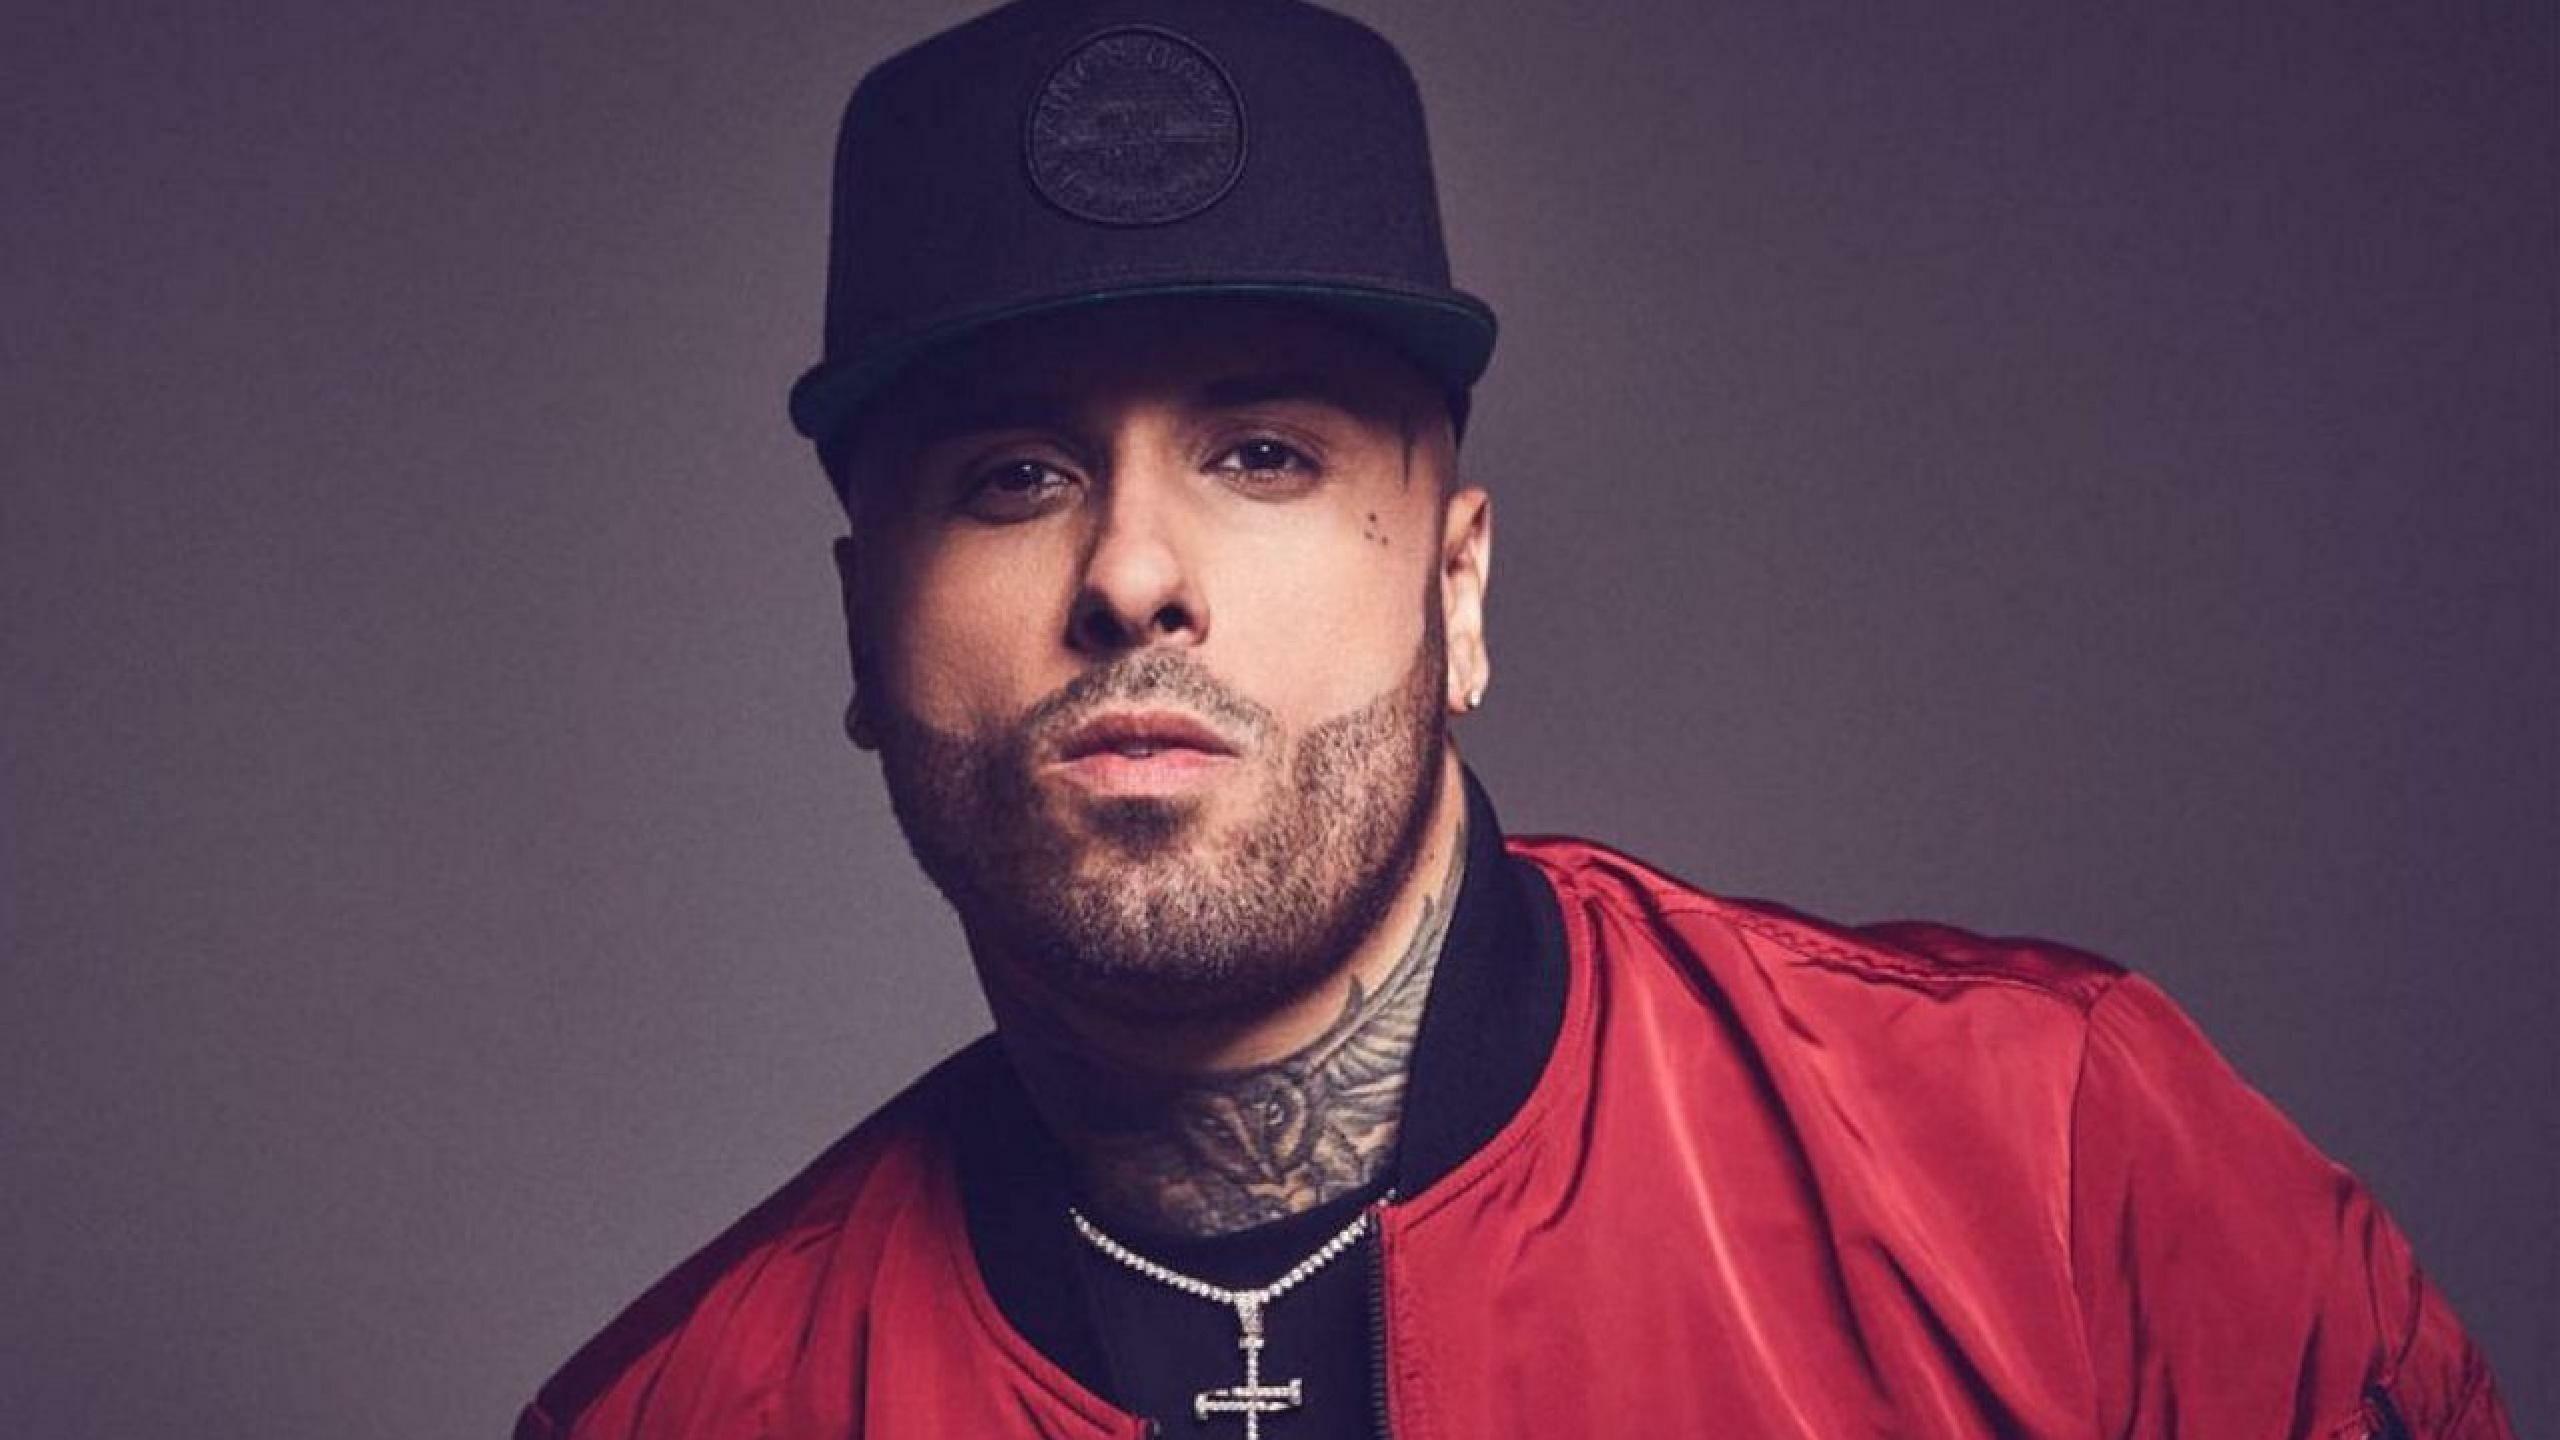 Nicky Jam, Concert tickets, Tour information, Exciting shows, 2560x1440 HD Desktop